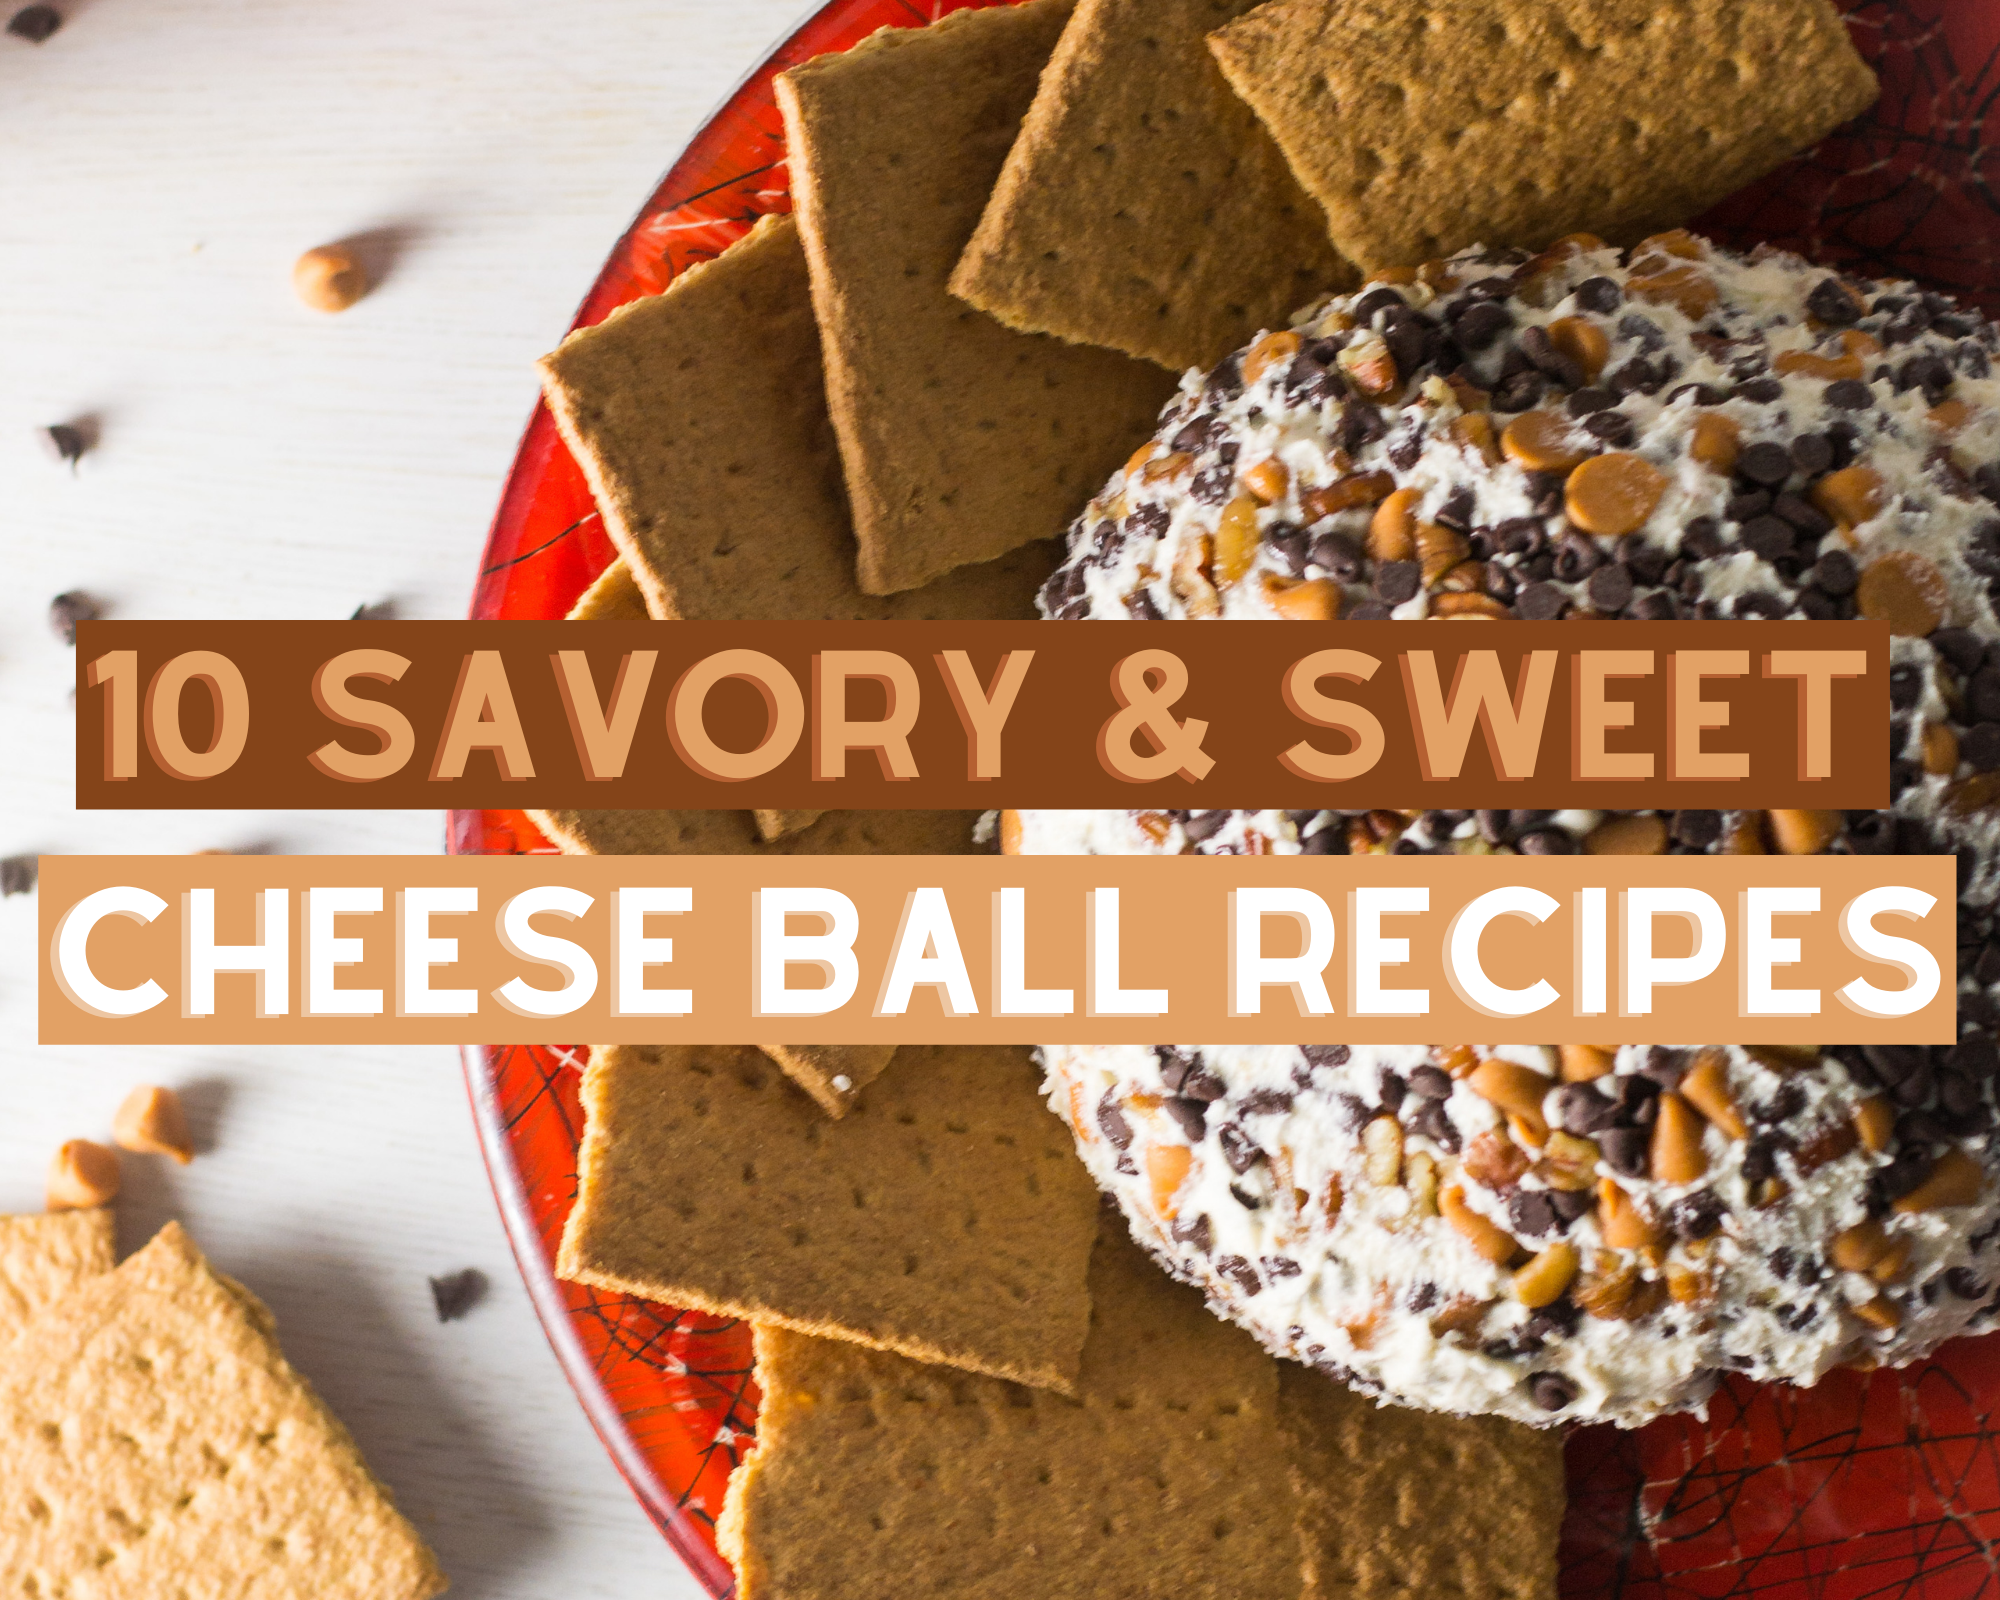 Savory and Sweet Cheese Ball Recipes